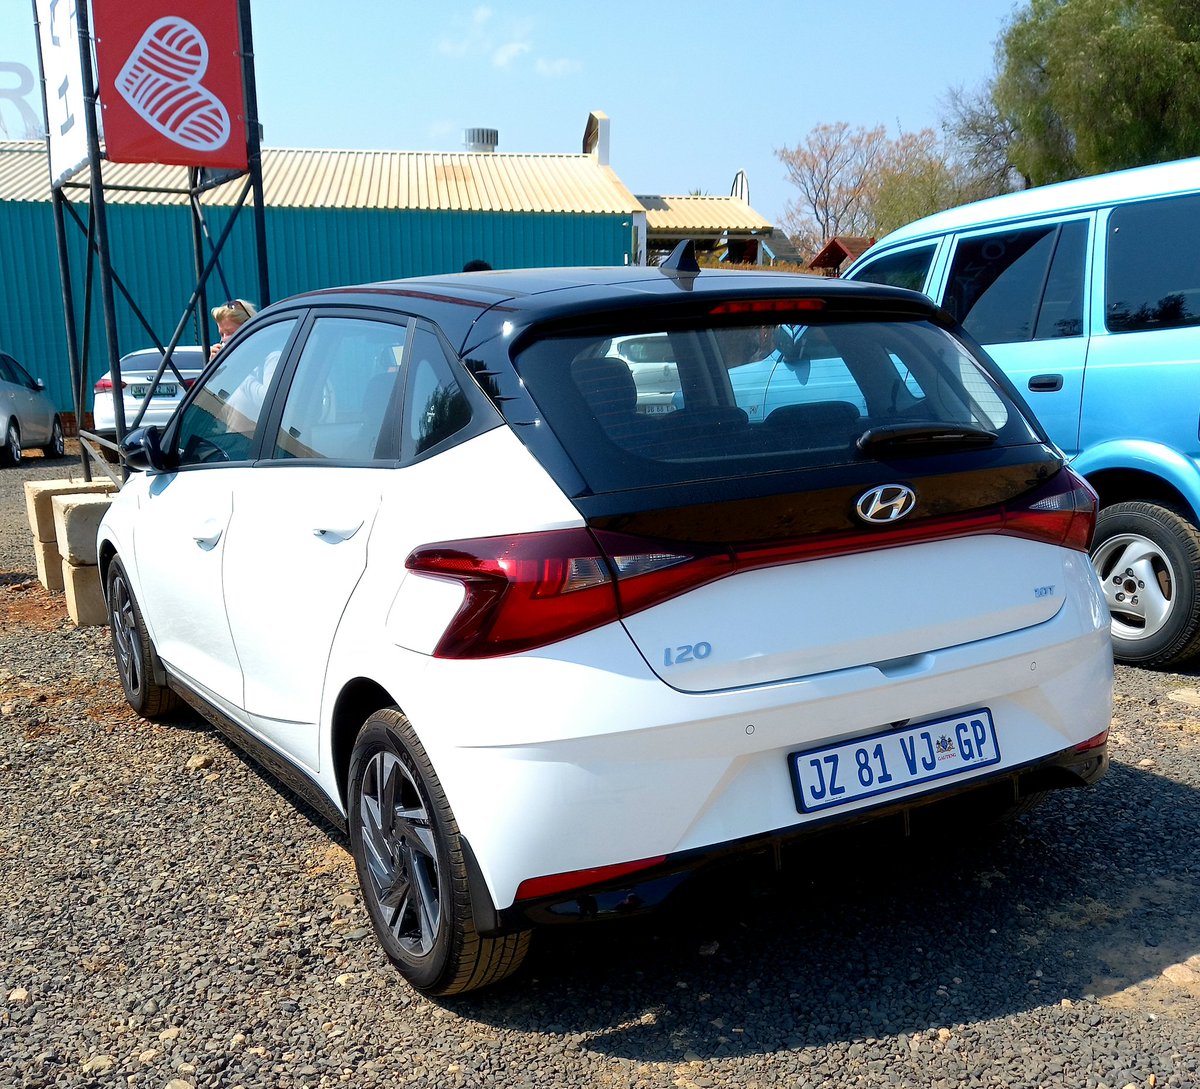 Weekends are for famous @motormatters #RoadTrips so the @HyundaiSA #i20 headed us out to #Hartebeespoort for some #R&R. 1.0 turbo has plenty of go and 5.3l/100km for the drive. @Hyundai_Global @TechnoBokMedia @craigjsa @DutchmanSeb @Wheels24 @SAGMJ @glendaw13